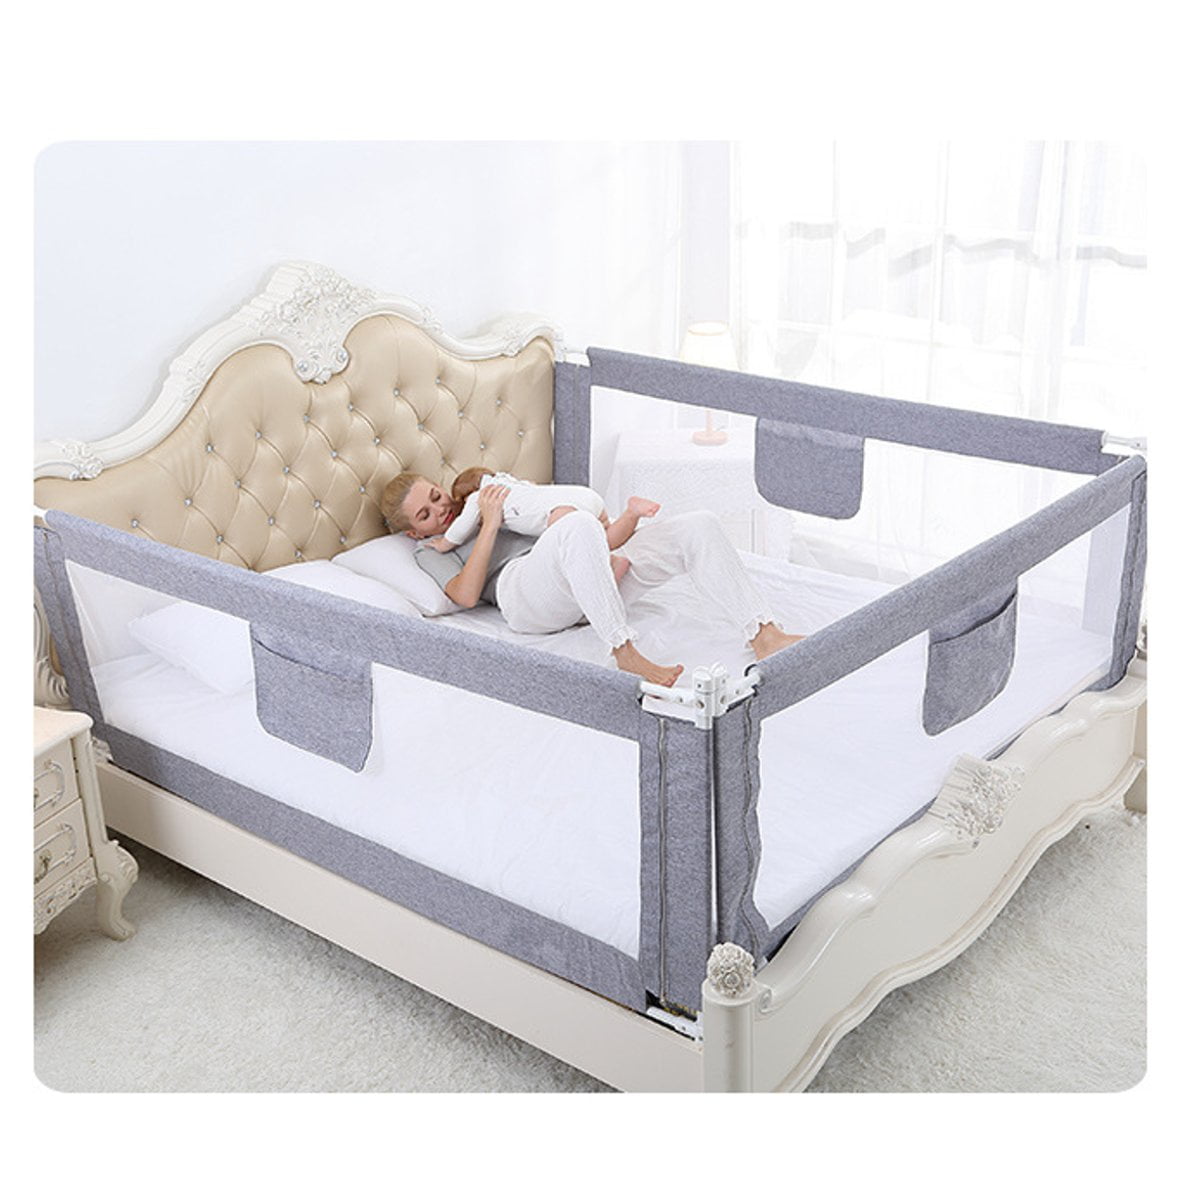 120 cm wooden Child Bed Baby Guard Safety Bedrail PINO white or beech 3.9 ft 